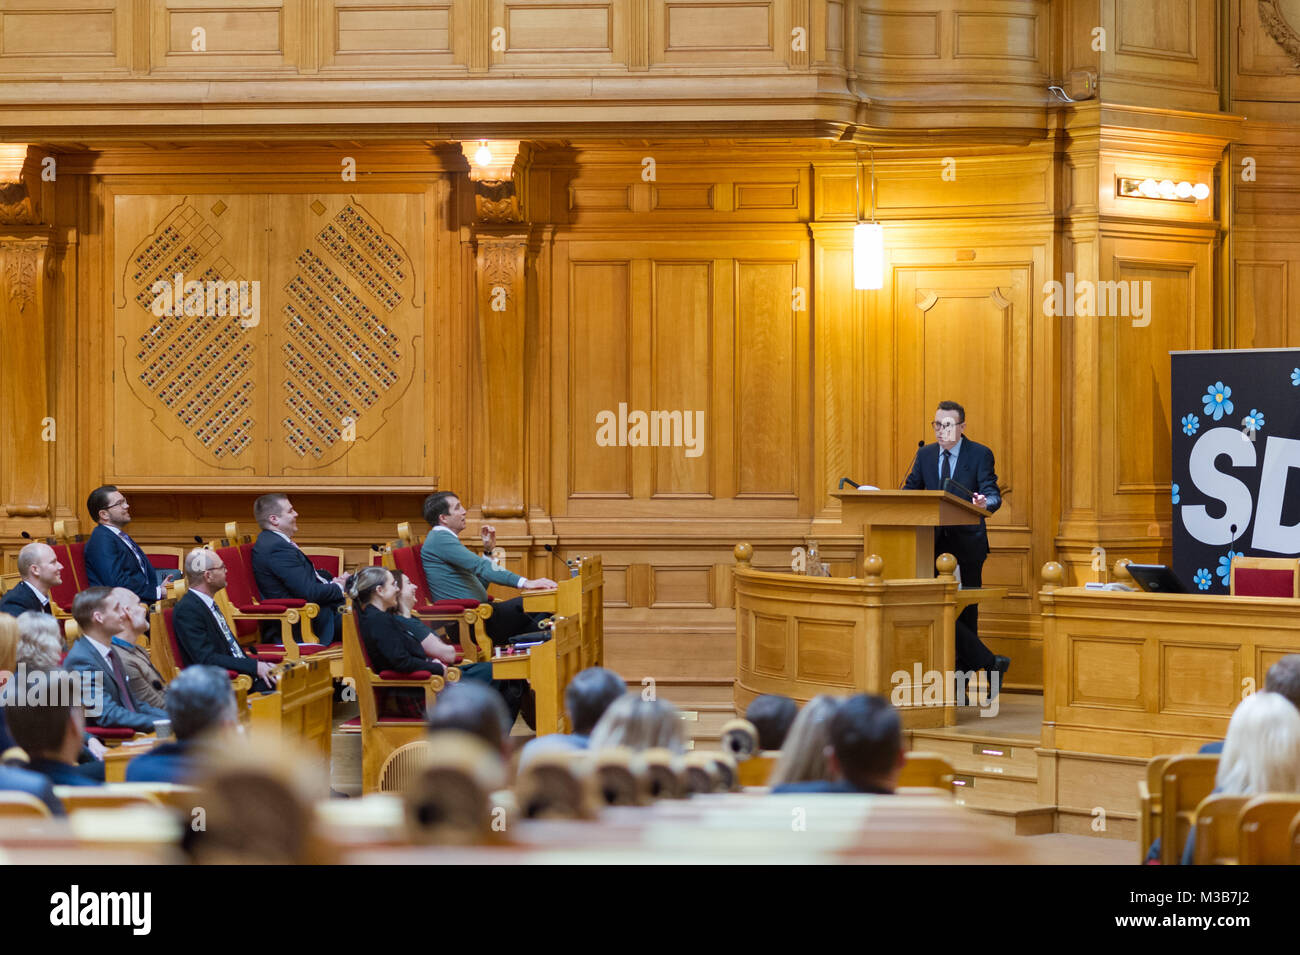 Stockholm, Sweden, 10th February, 2018. 'Future Conference' Sweden Democrats (SD) (Sverigedemokraterna) at the House of Parliament, Stockholm. Communications Manager Joakim Wallerstein speech on the importance of social media in parliamentary work. Stock Photo